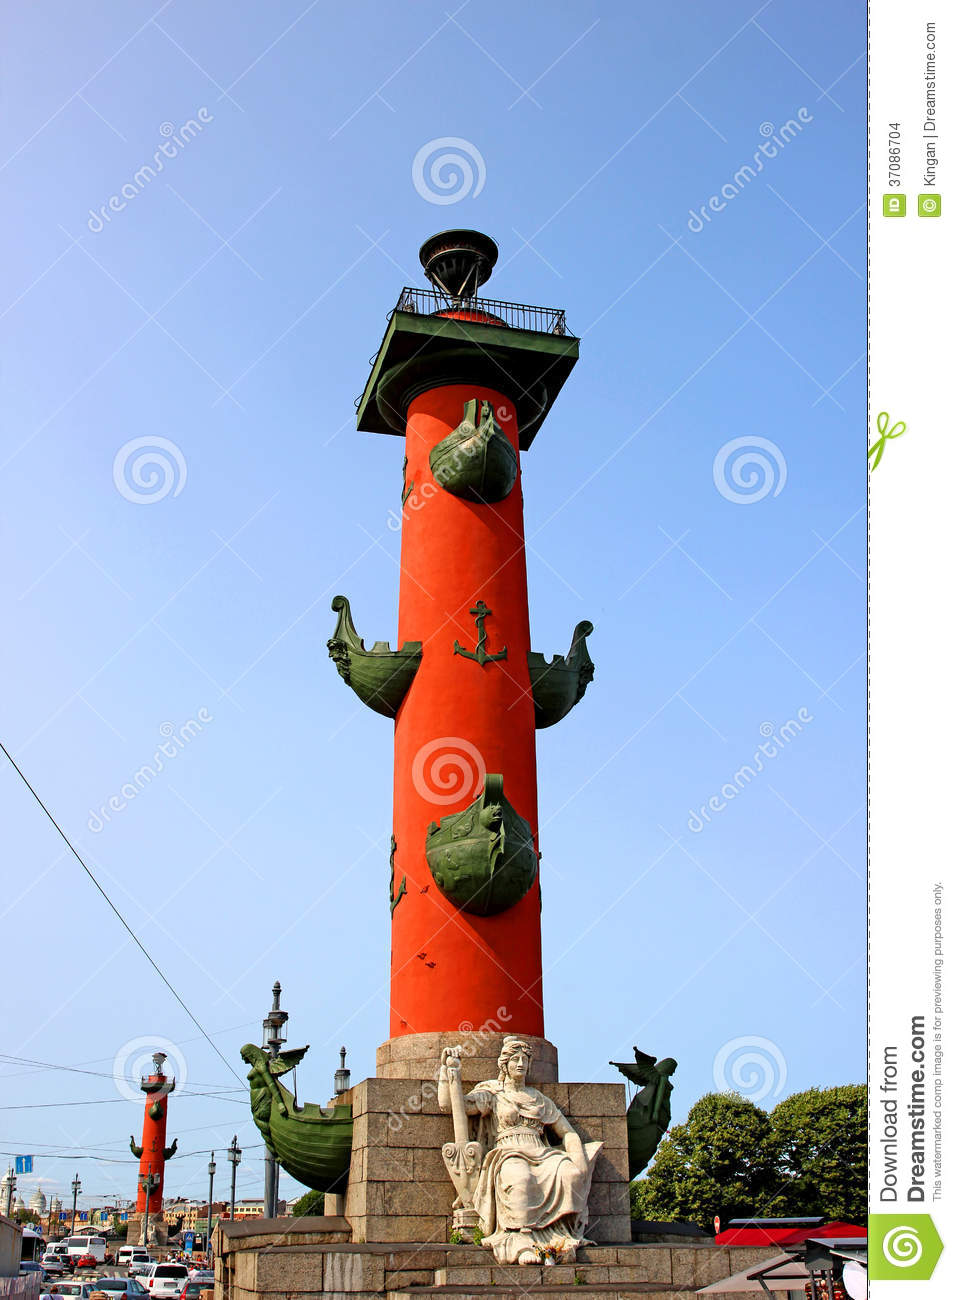 Rostral Columns In St. Petersburg (Russia) Stock Images.